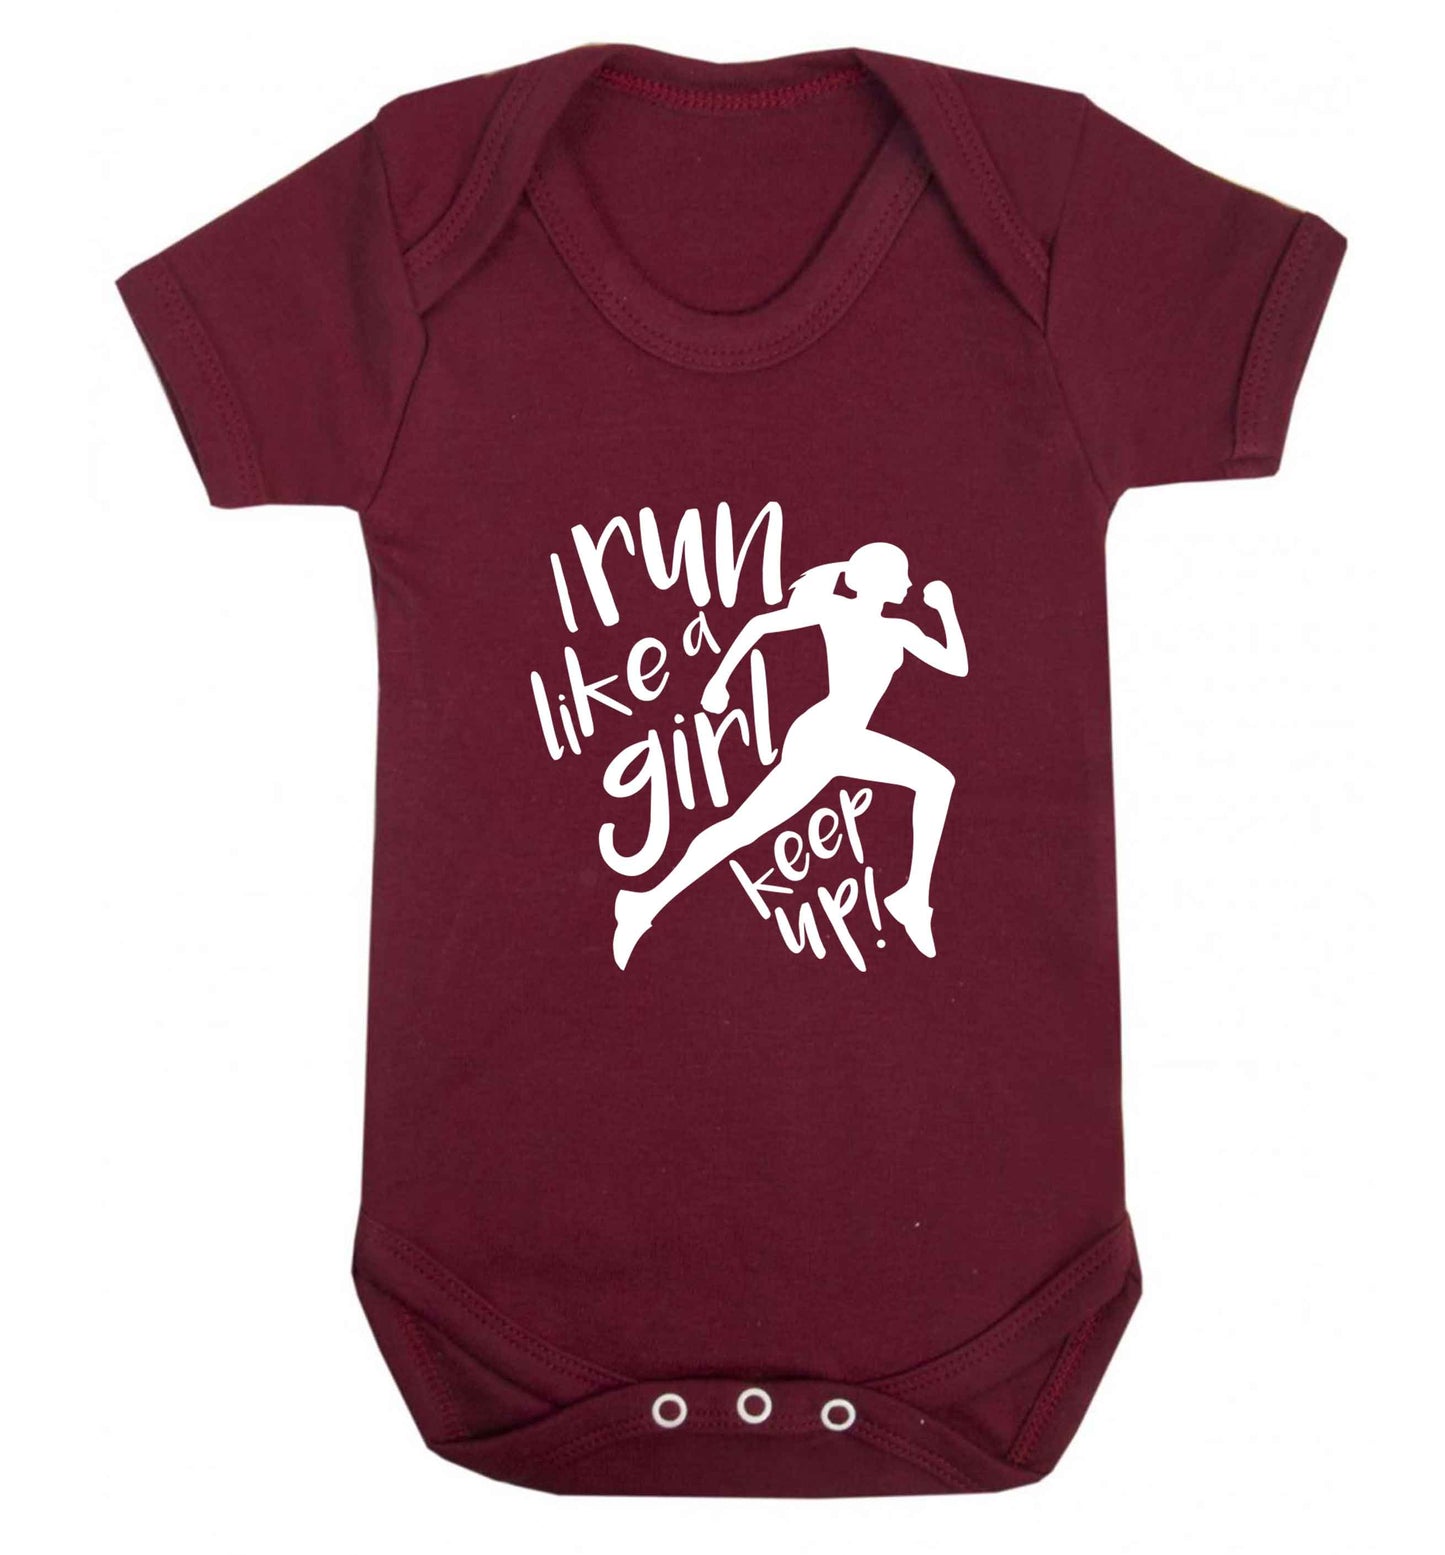 I run like a girl, keep up! baby vest maroon 18-24 months